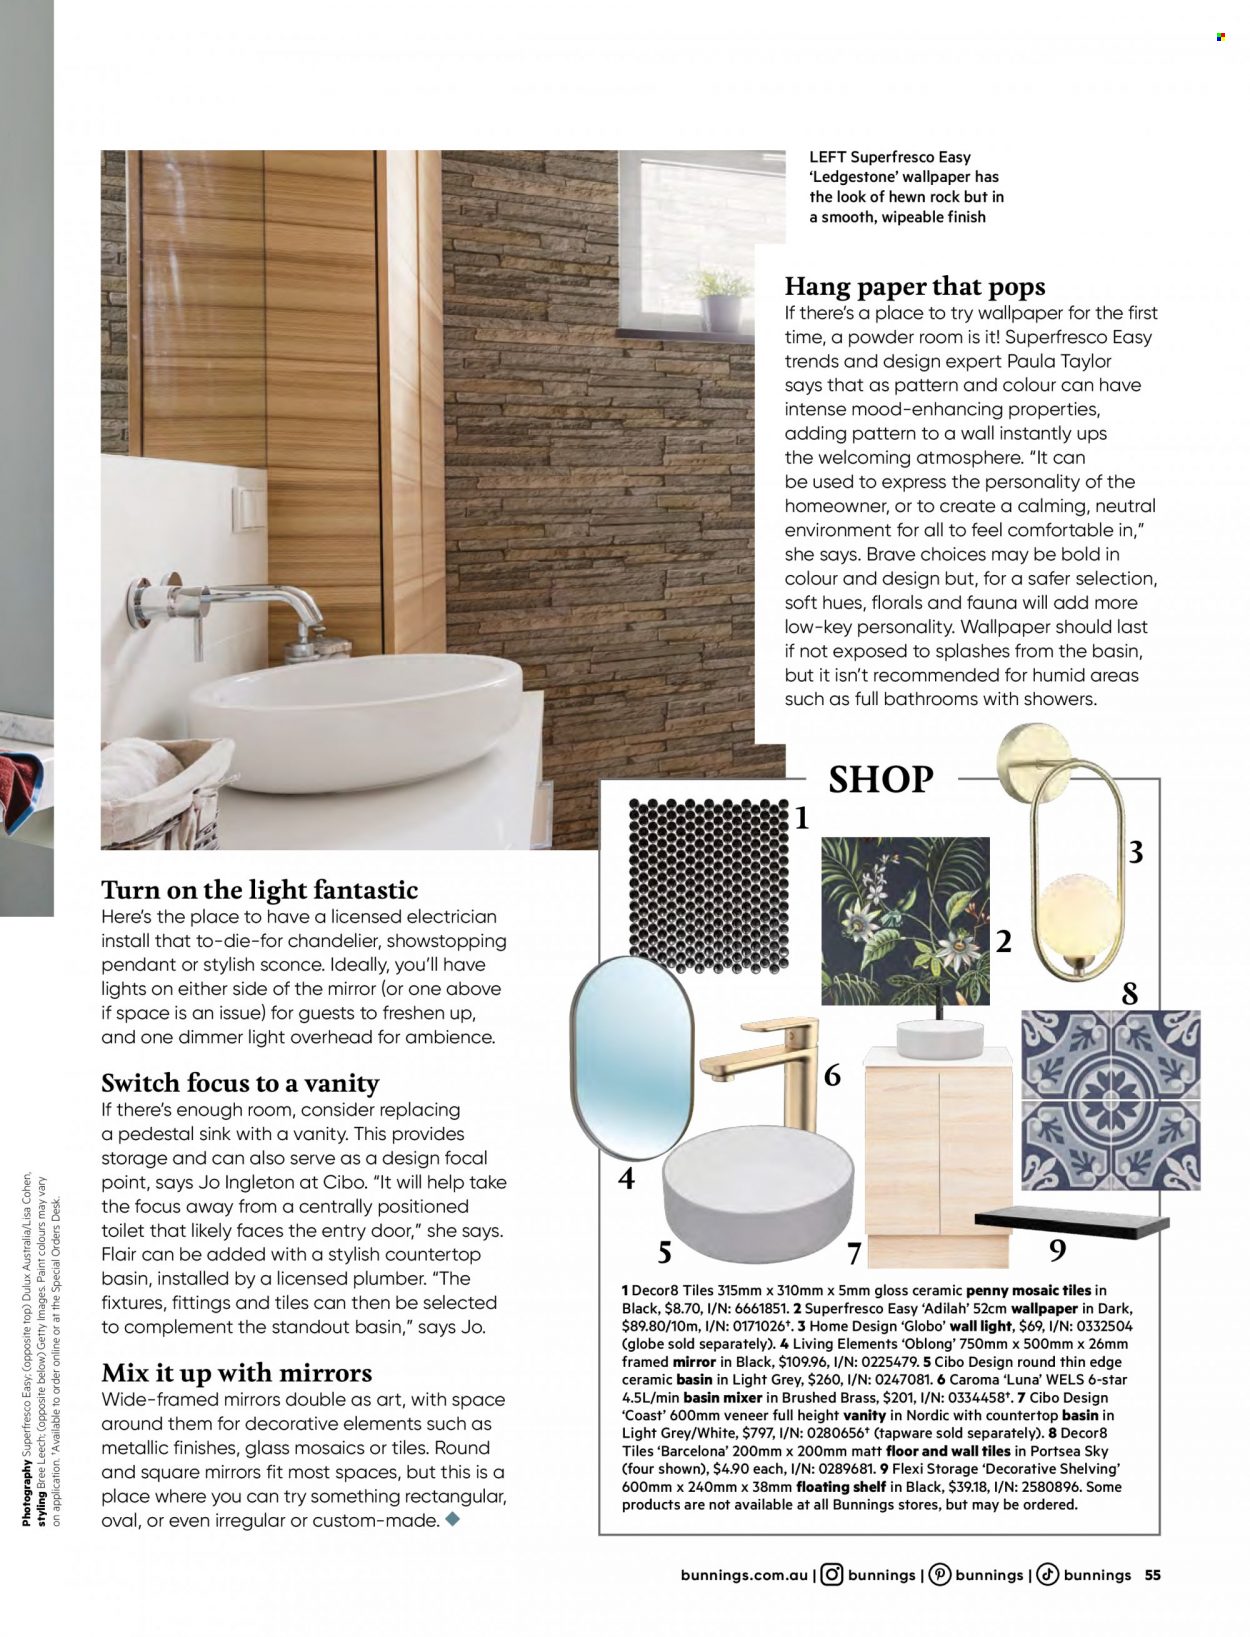 thumbnail - Bunnings Warehouse mailer - 01.03.2023 - 31.03.2023 - Sales products - toilet, basin mixer, shelves, vanity, desk, mirror, sink, paint, Dulux, wallpaper, chandelier, switch. Page 55.